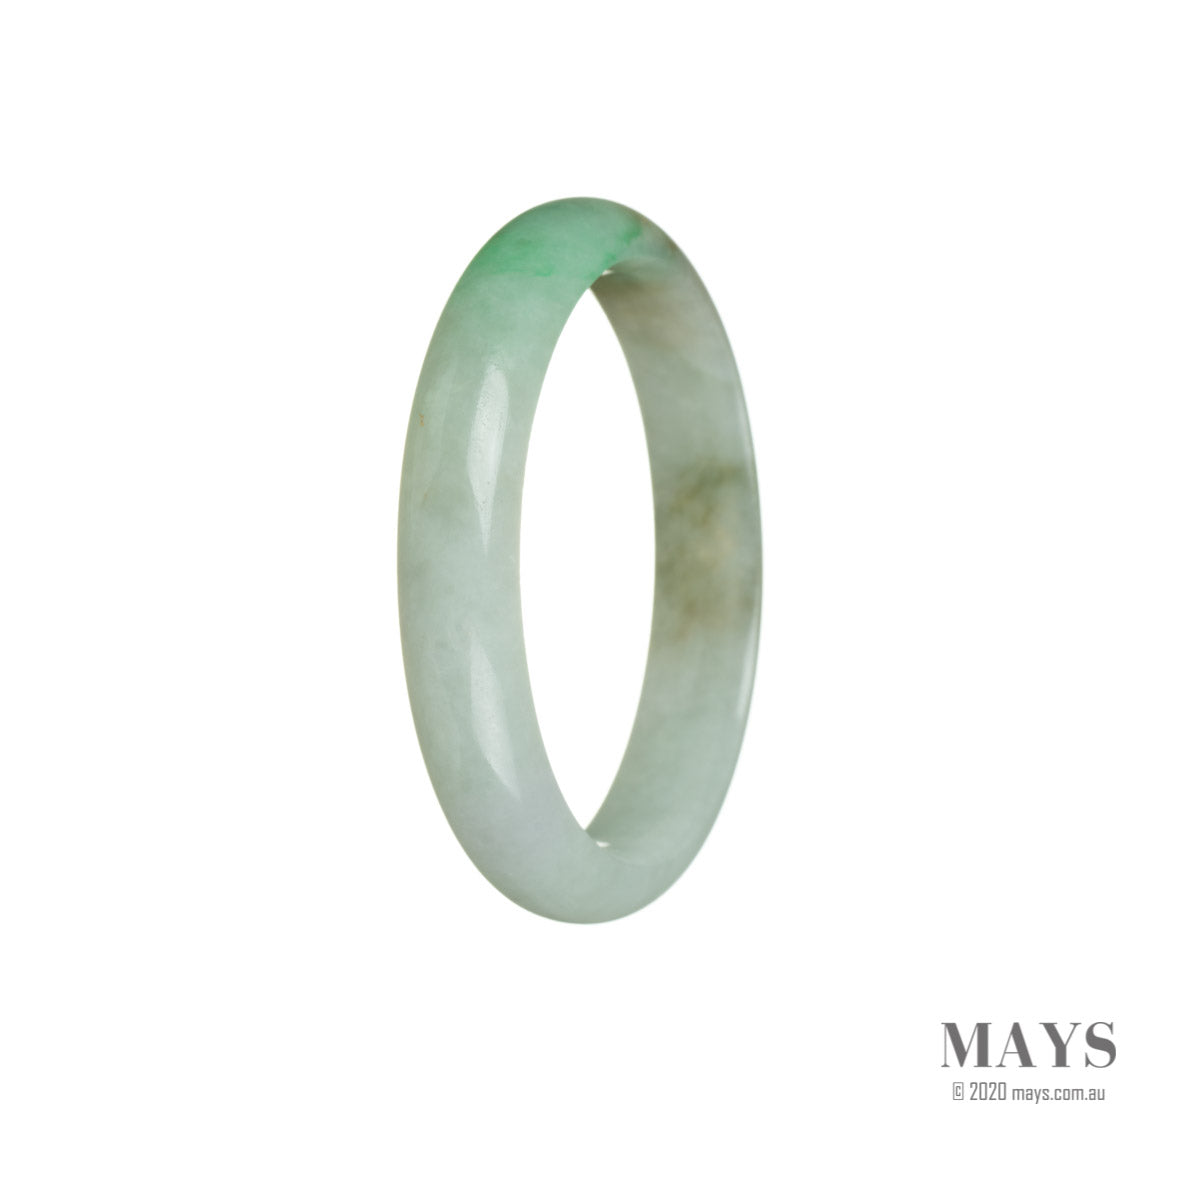 A beautiful half moon-shaped bangle made of genuine natural white jadeite jade with an intricate pattern.